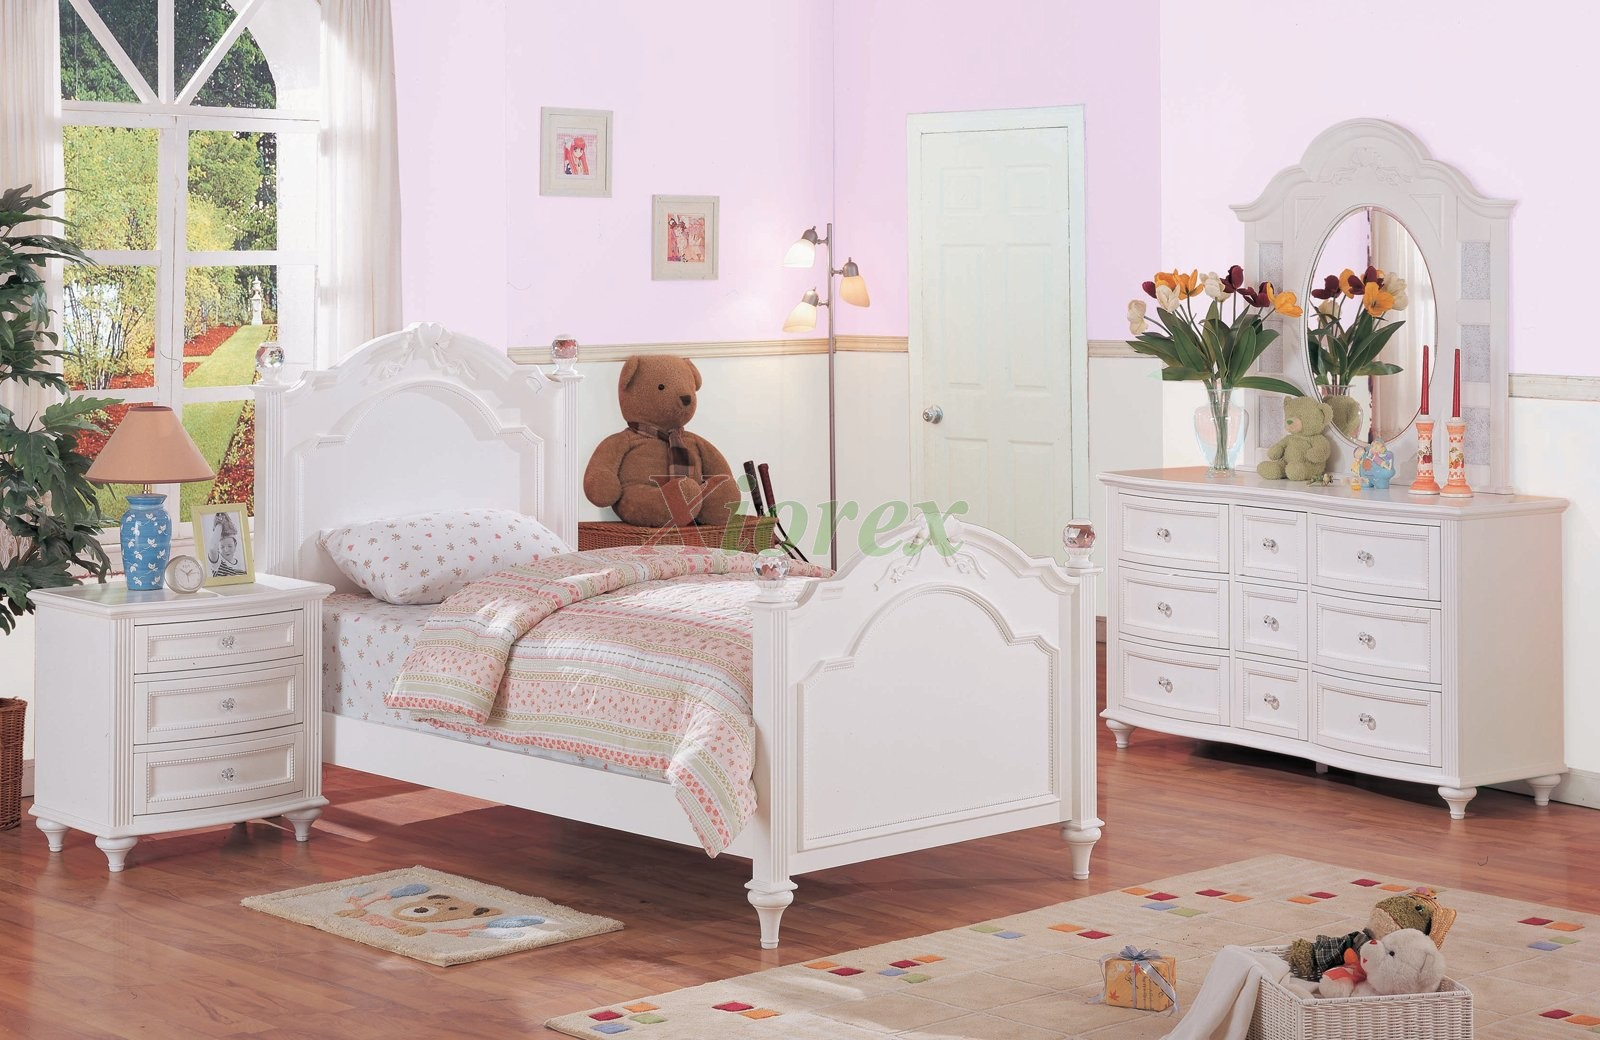 Kids White Bedroom Furniture For Decoration Decorating Ideas intended for sizing 1600 X 1040